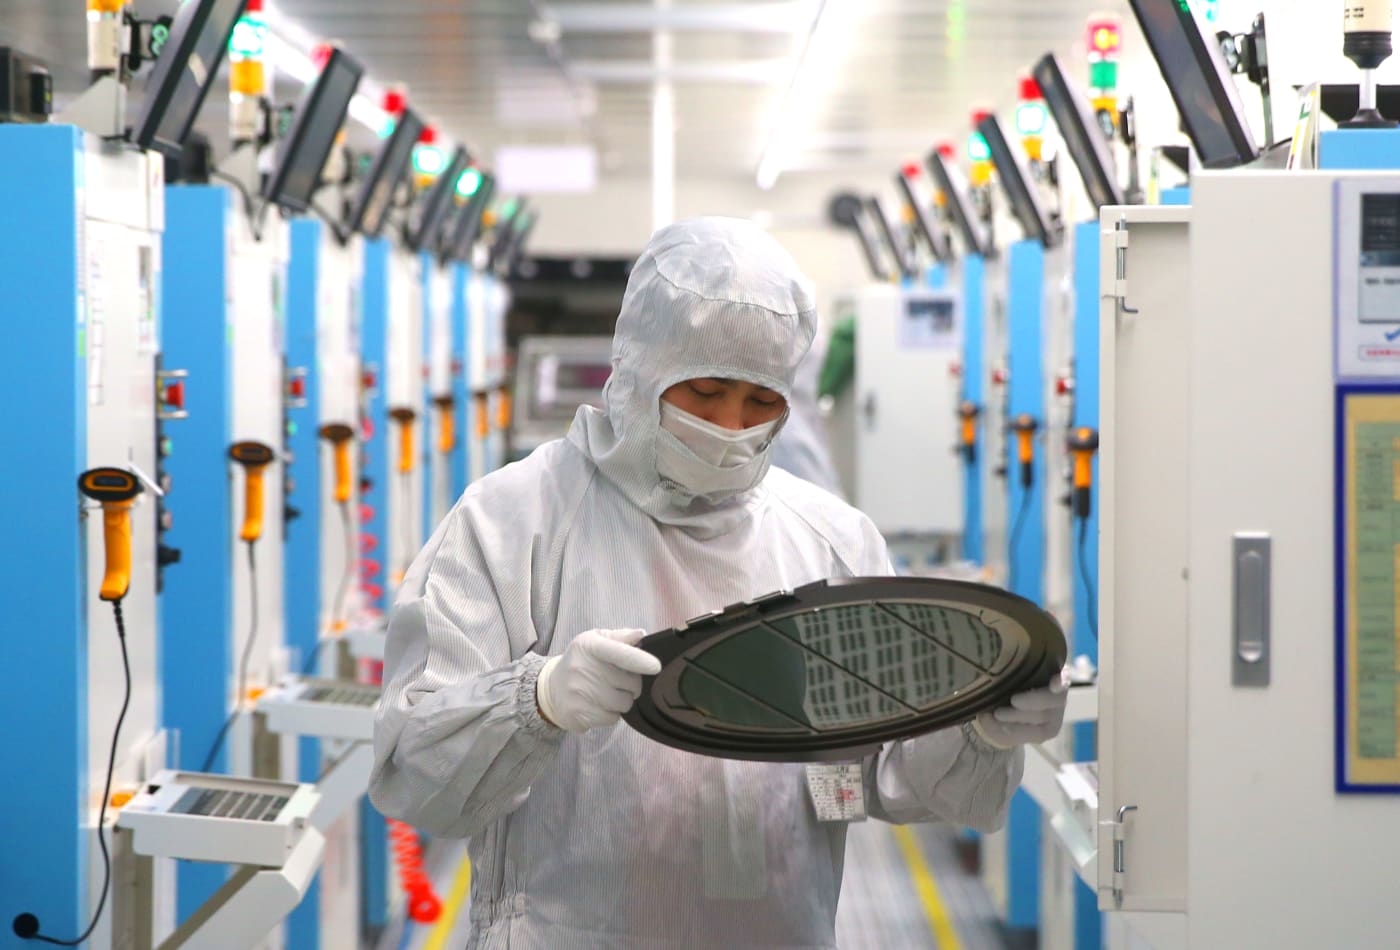 China is still 'three or four generations' away from developing latest semiconductor tech, IDC says